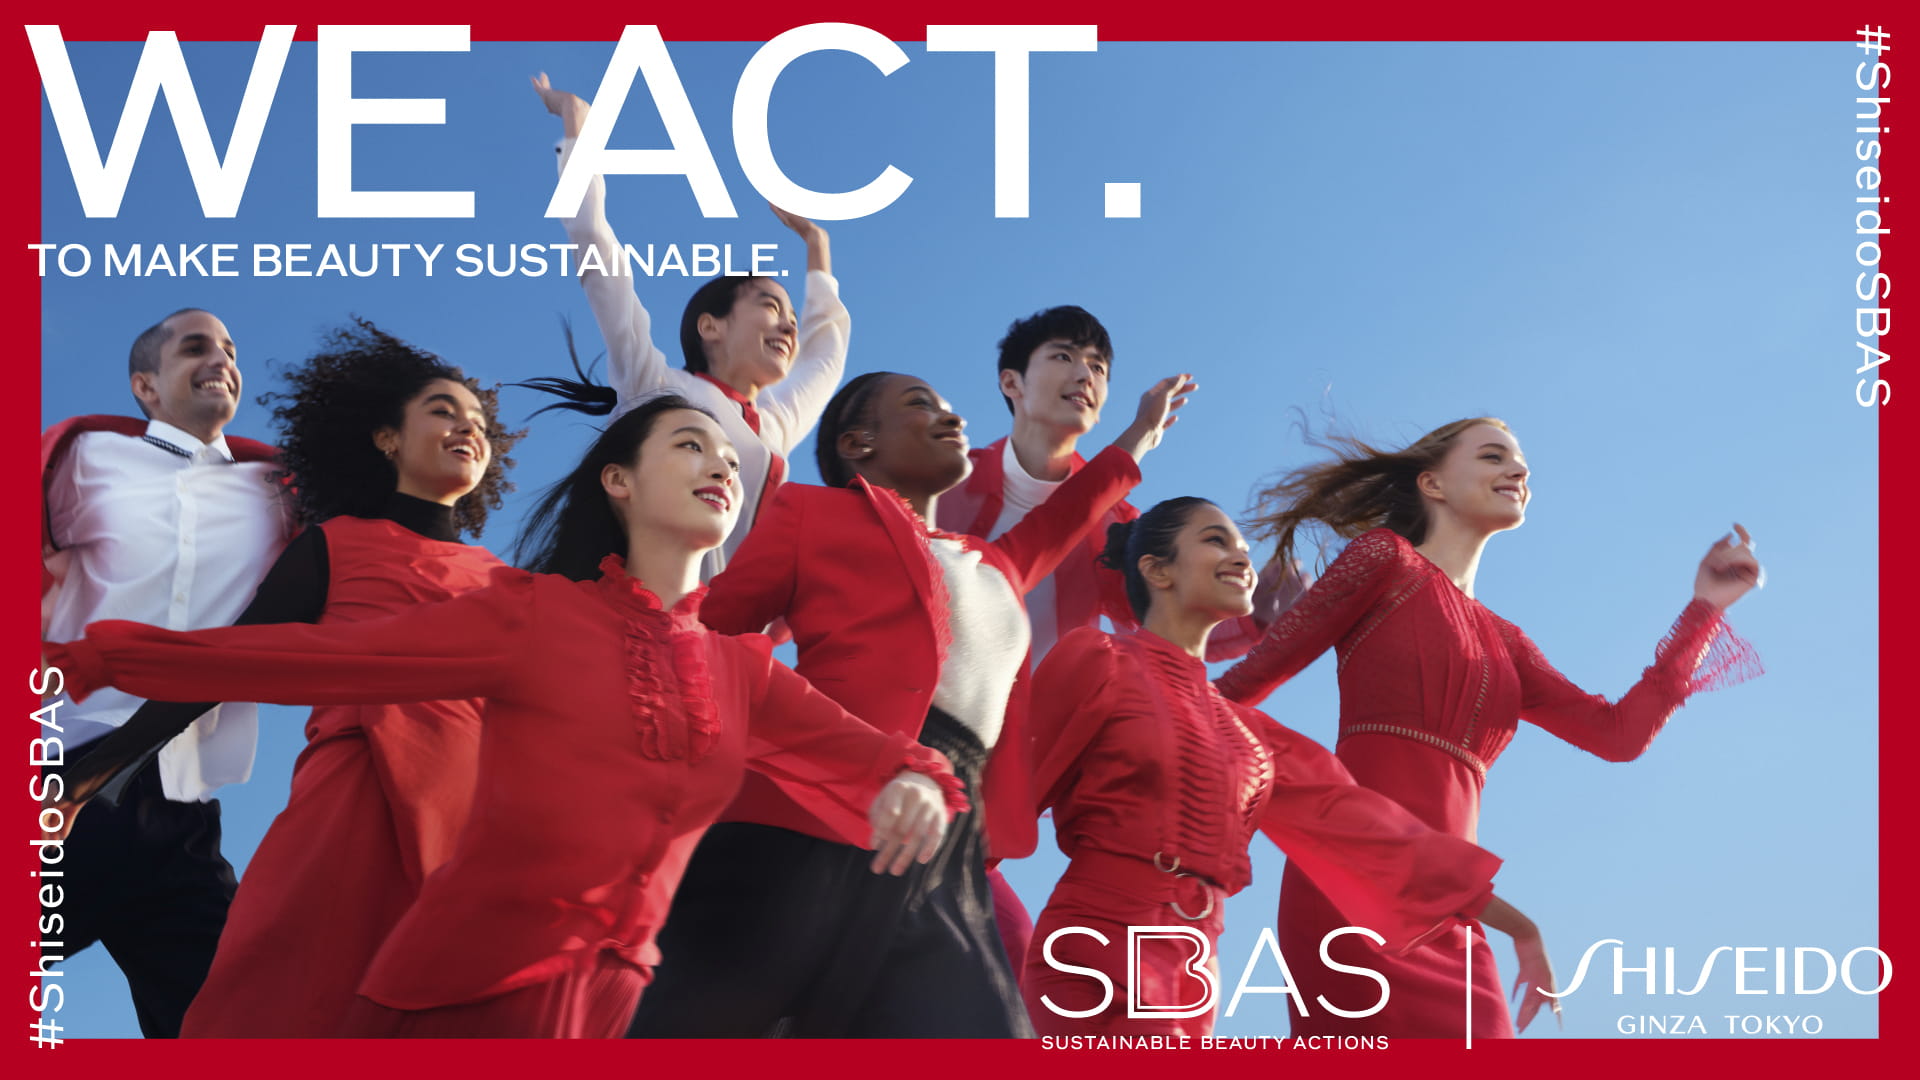 SBAS SUSTAINABLE BEAUTY ACTIONS